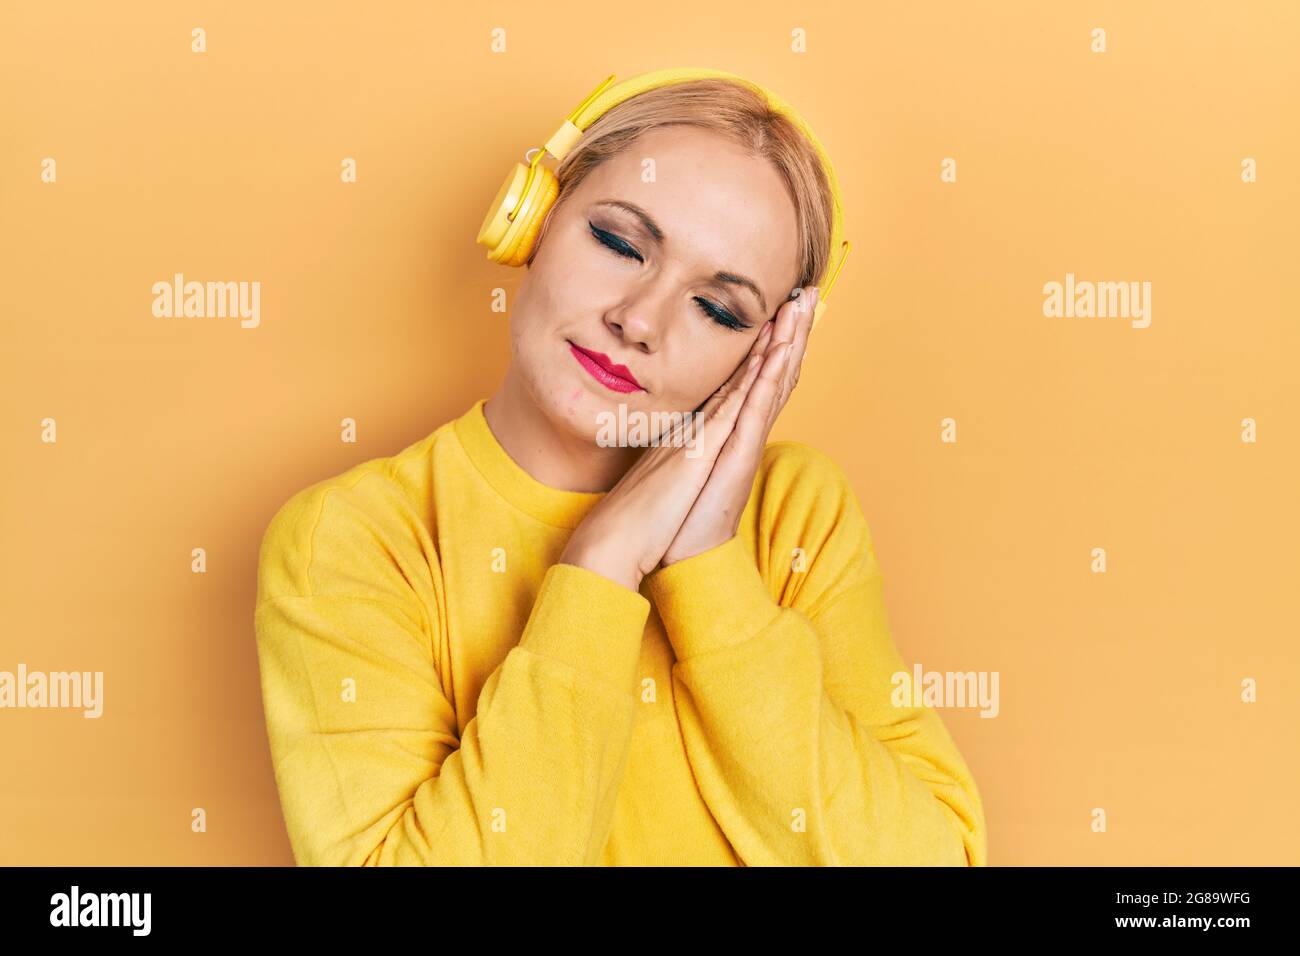 Young Blonde Woman Listening To Music Using Headphones Sleeping Tired Dreaming And Posing With 5744